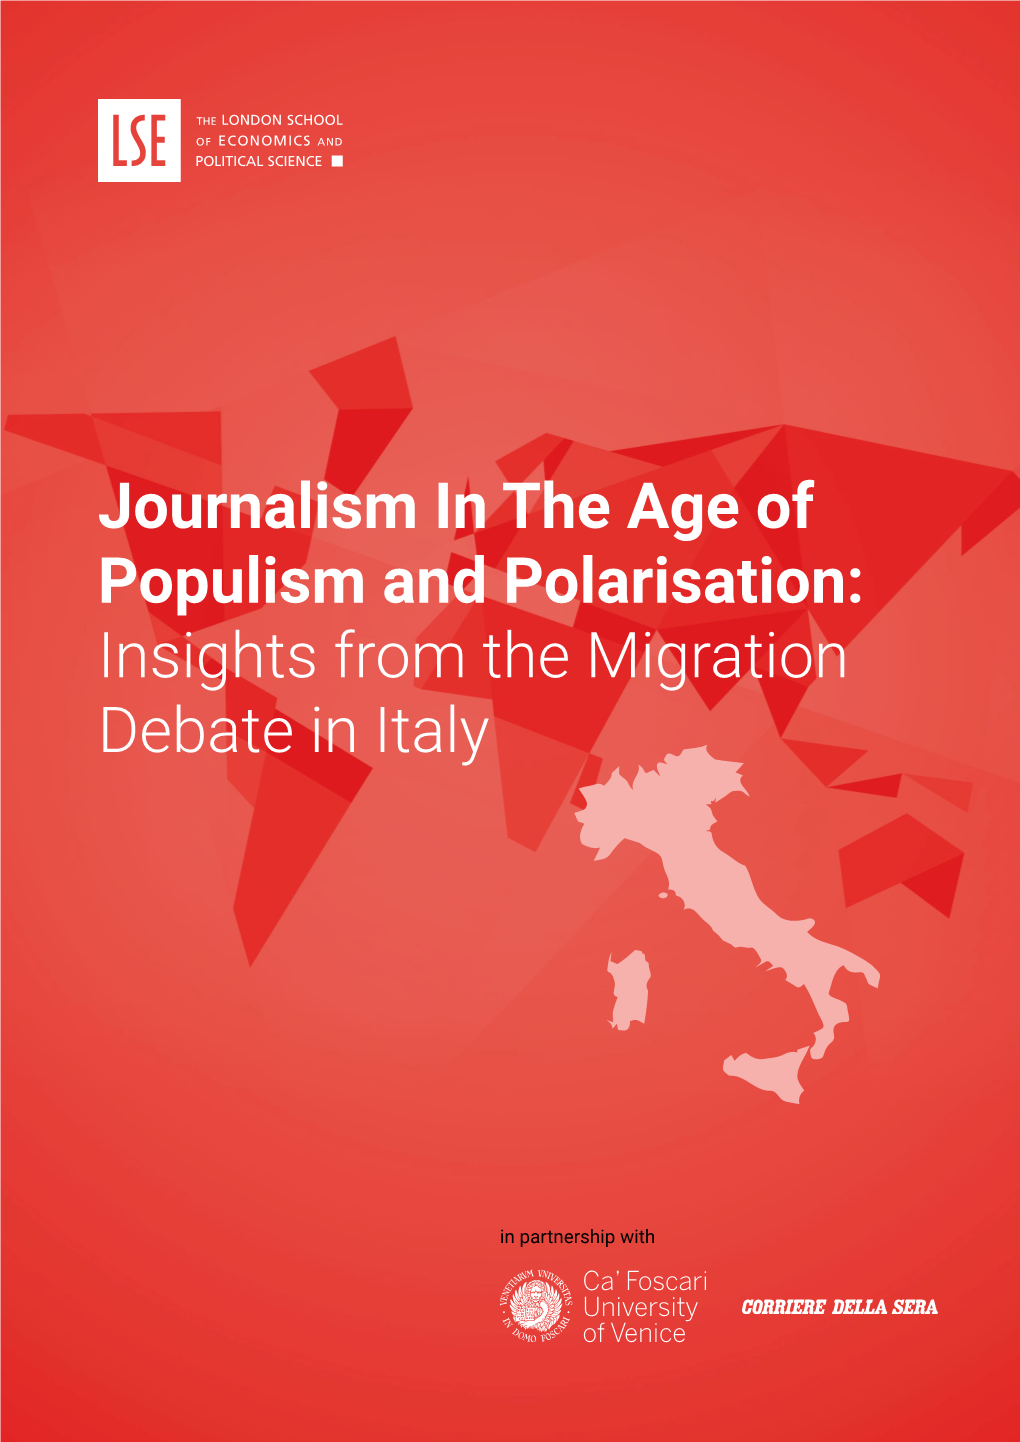 Insights from the Migration Debate in Italy